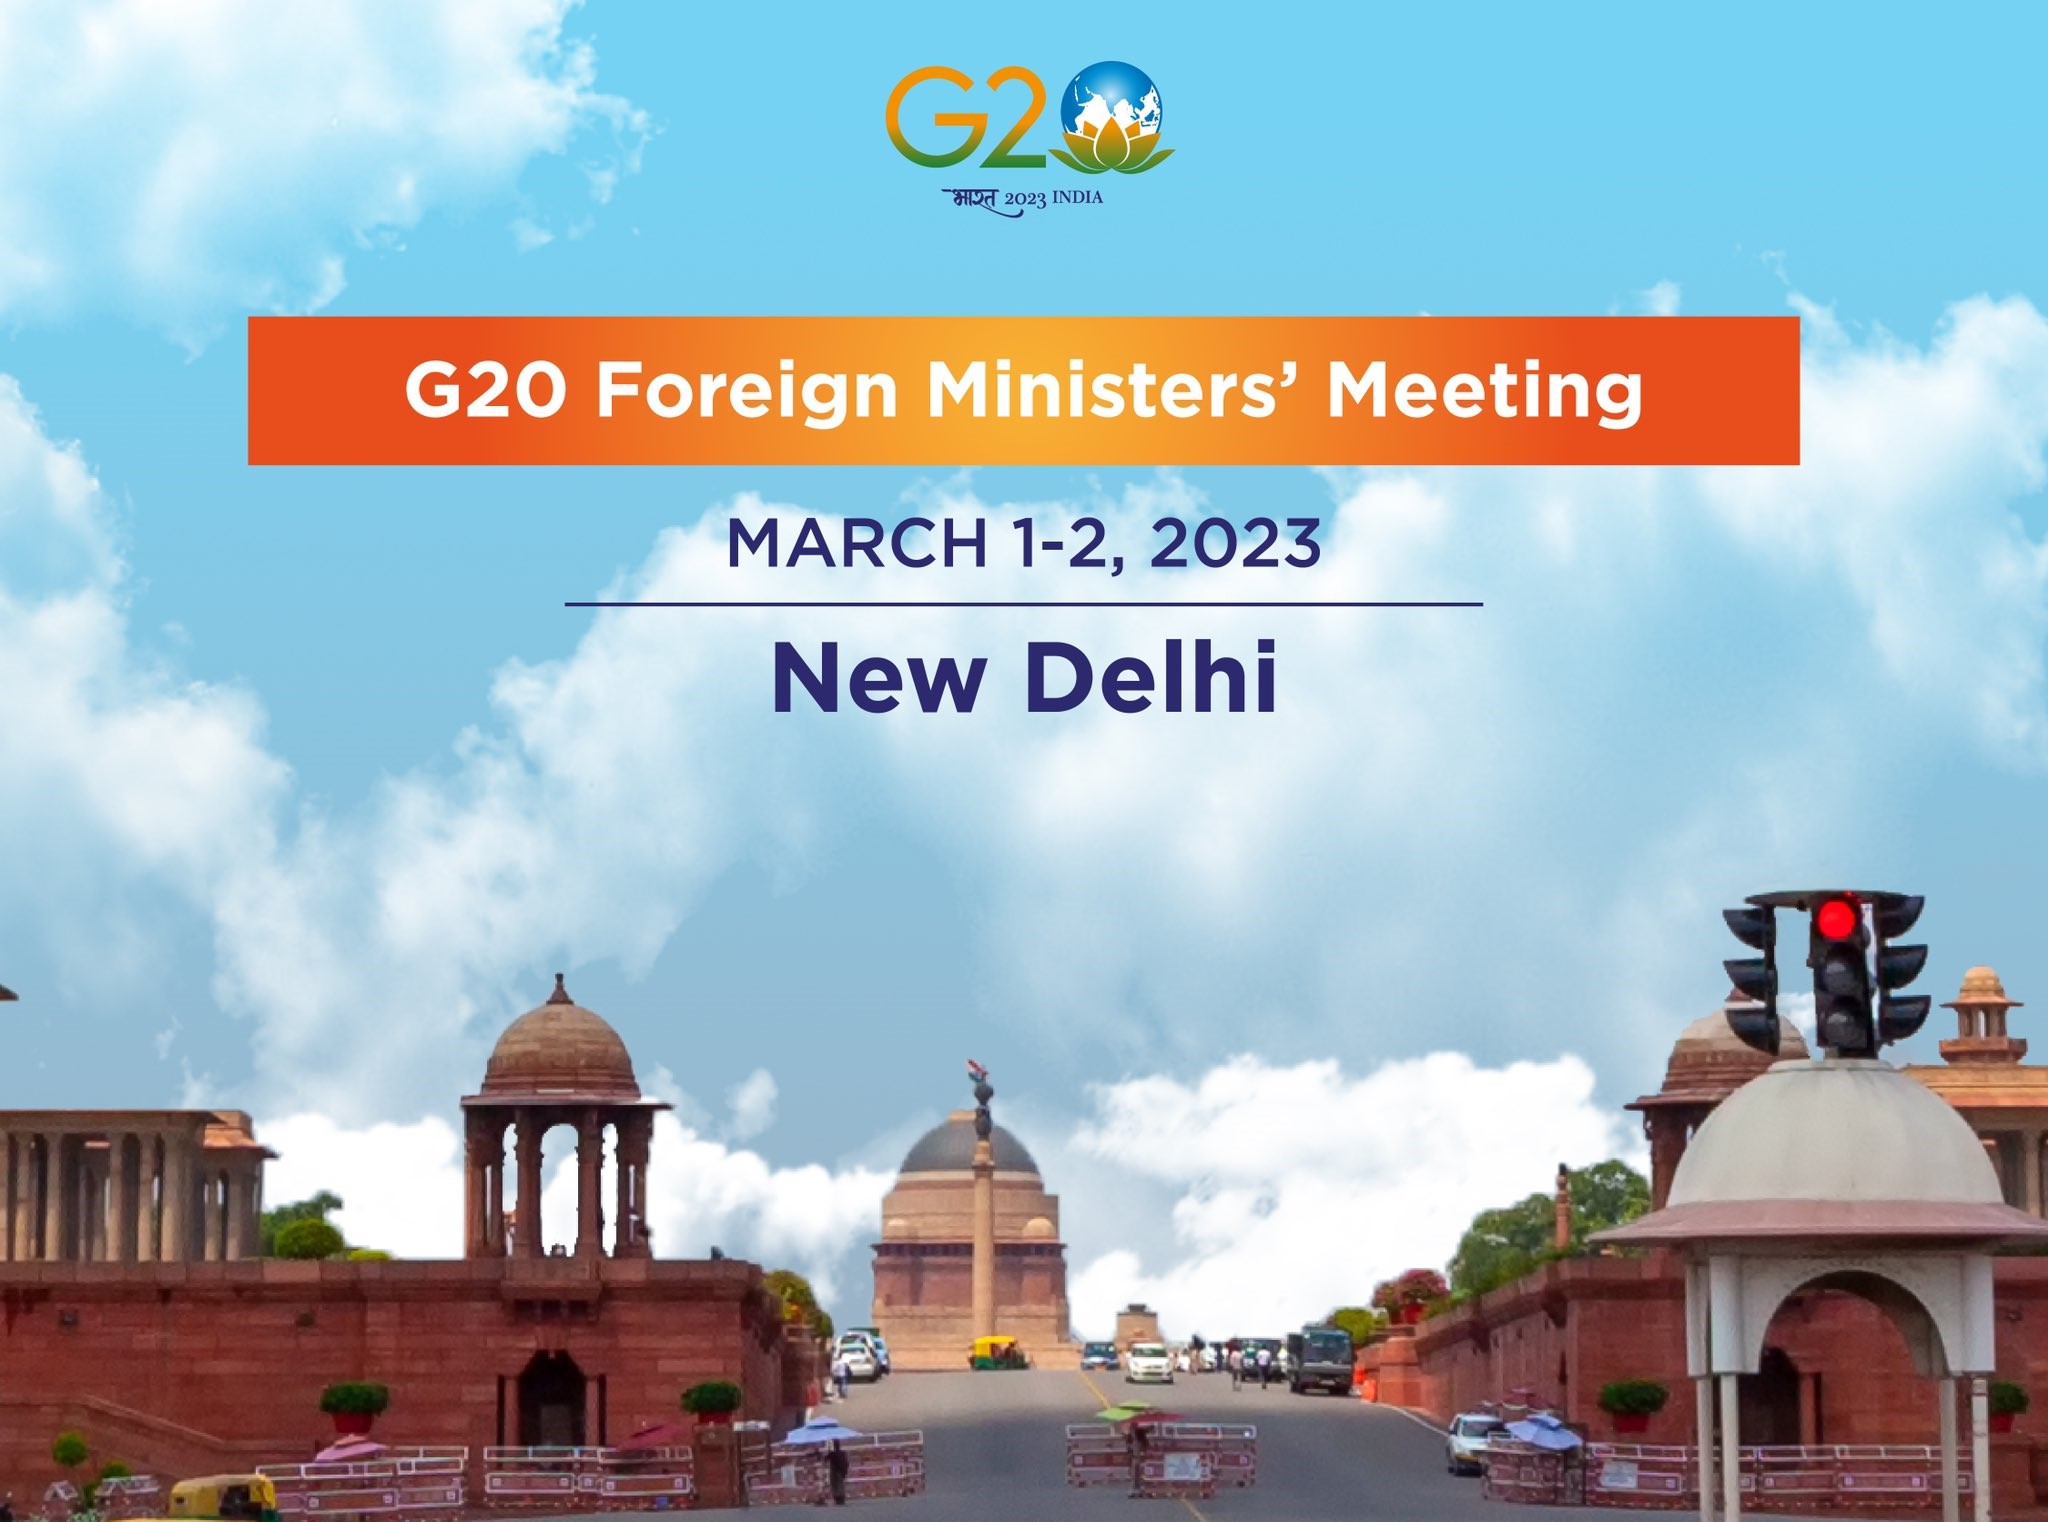 India to host G20 Foreign Ministers meet under its presidency in New Delhi